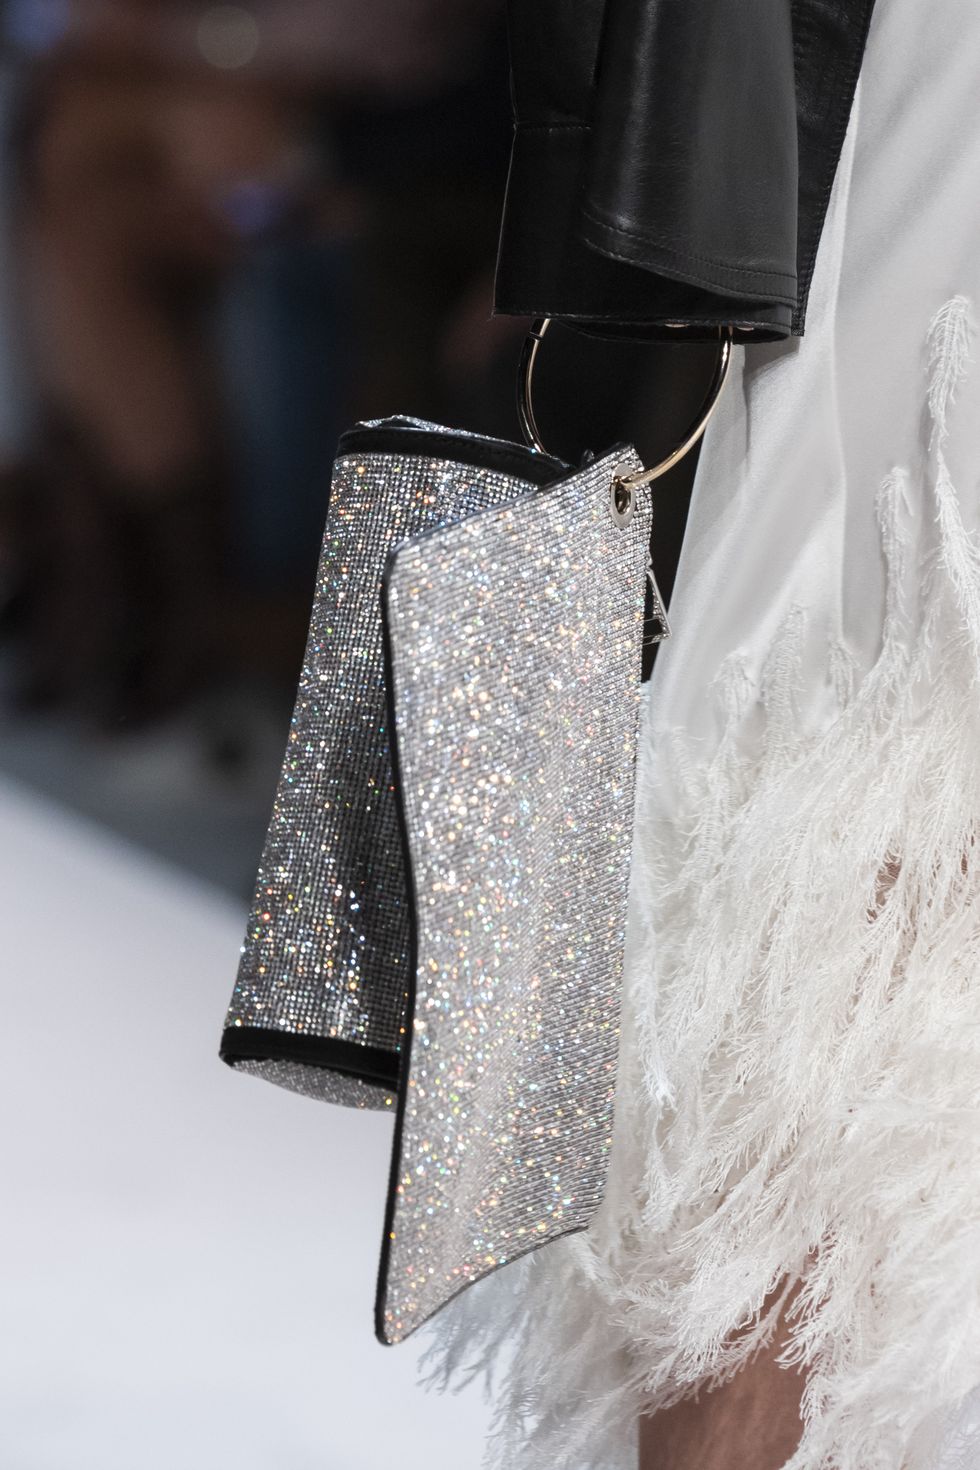 Favourite Bags of 2020 - Glam & Glitter